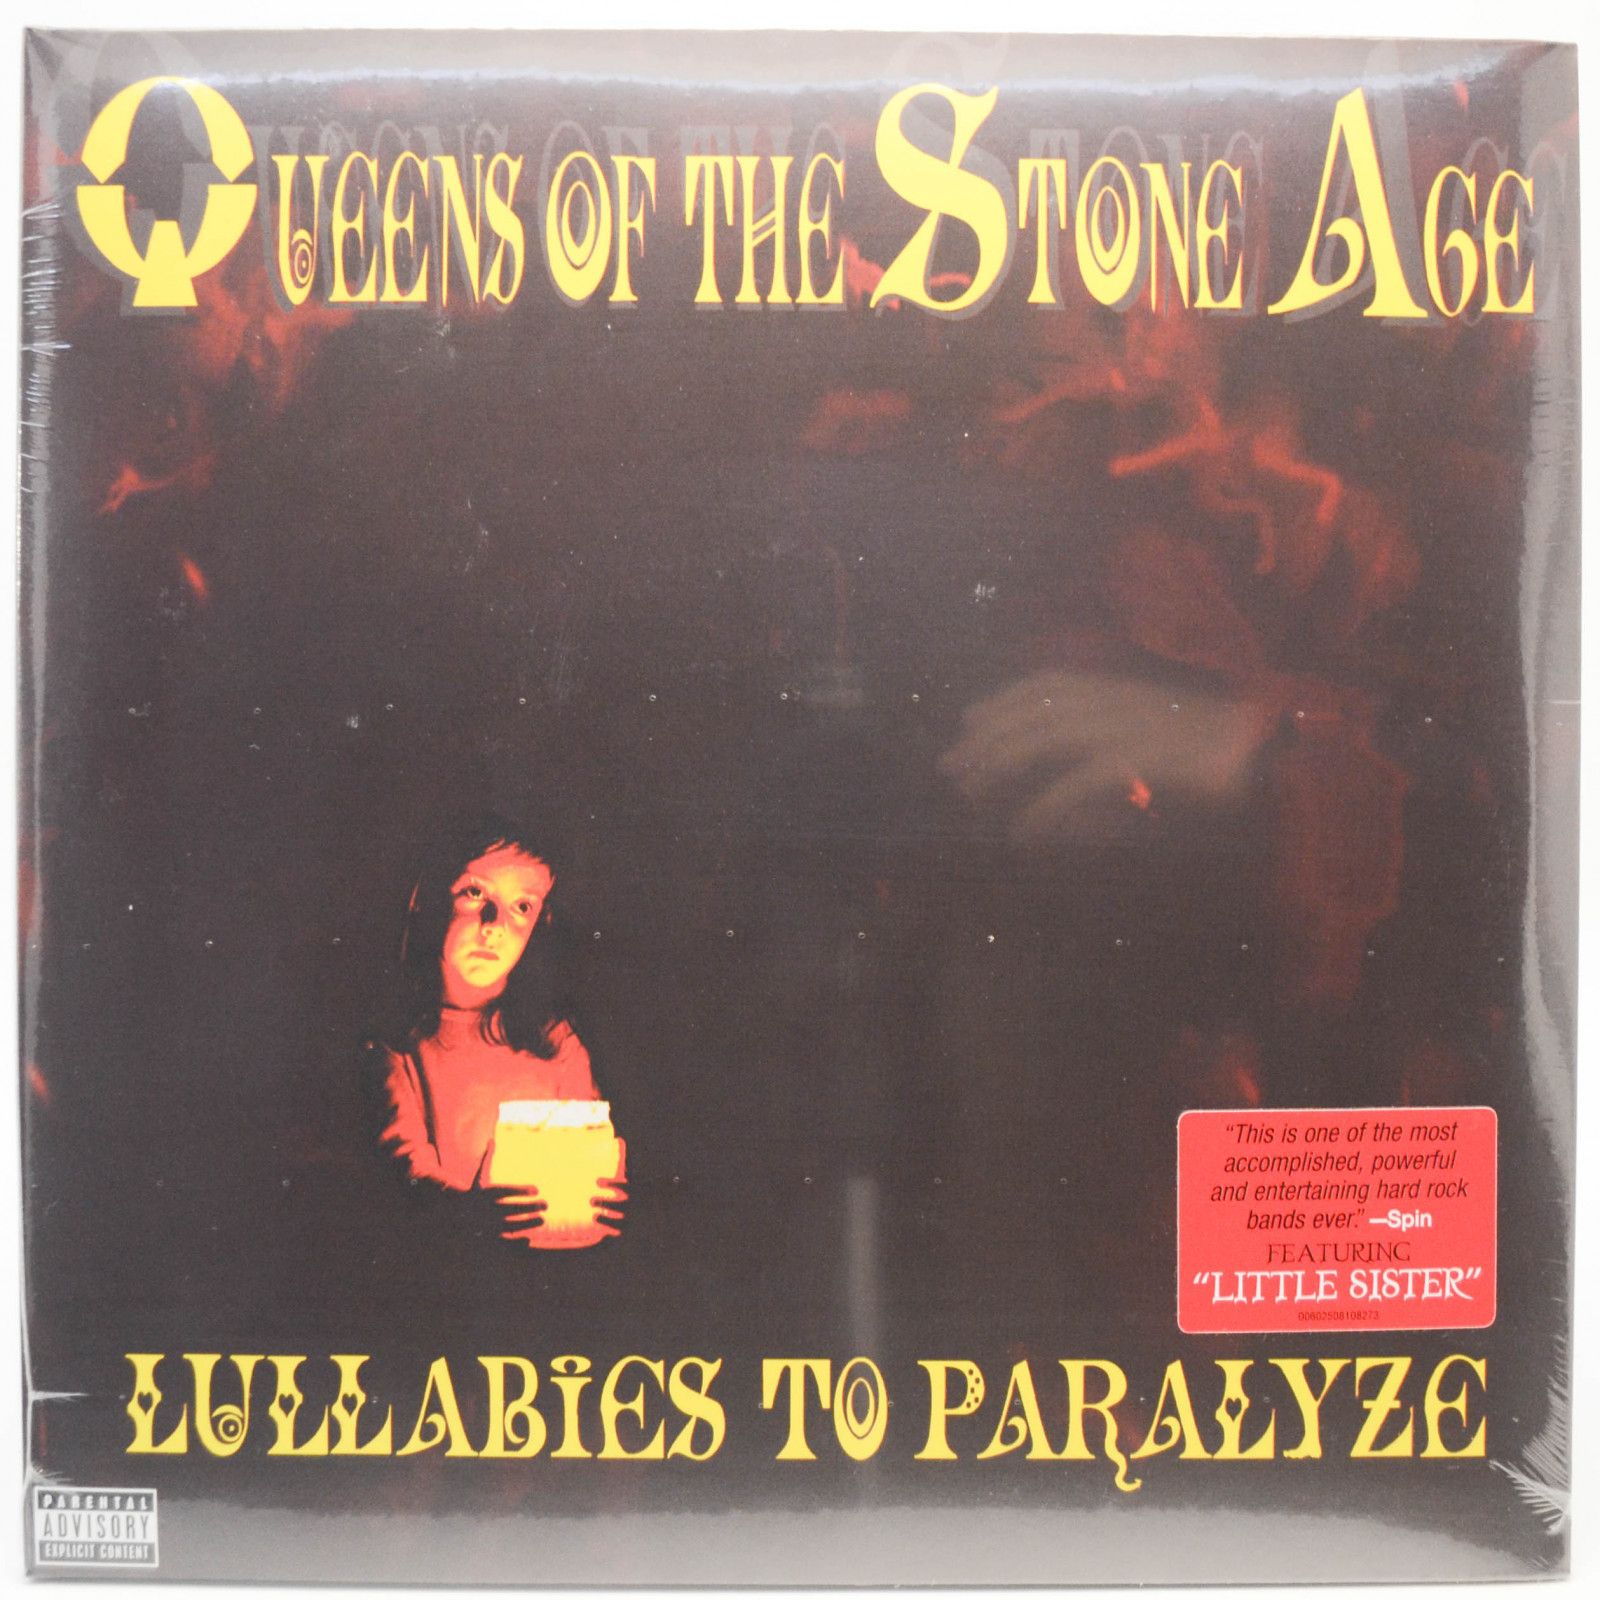 Queens Of The Stone Age — Lullabies To Paralyze (2LP), 2004